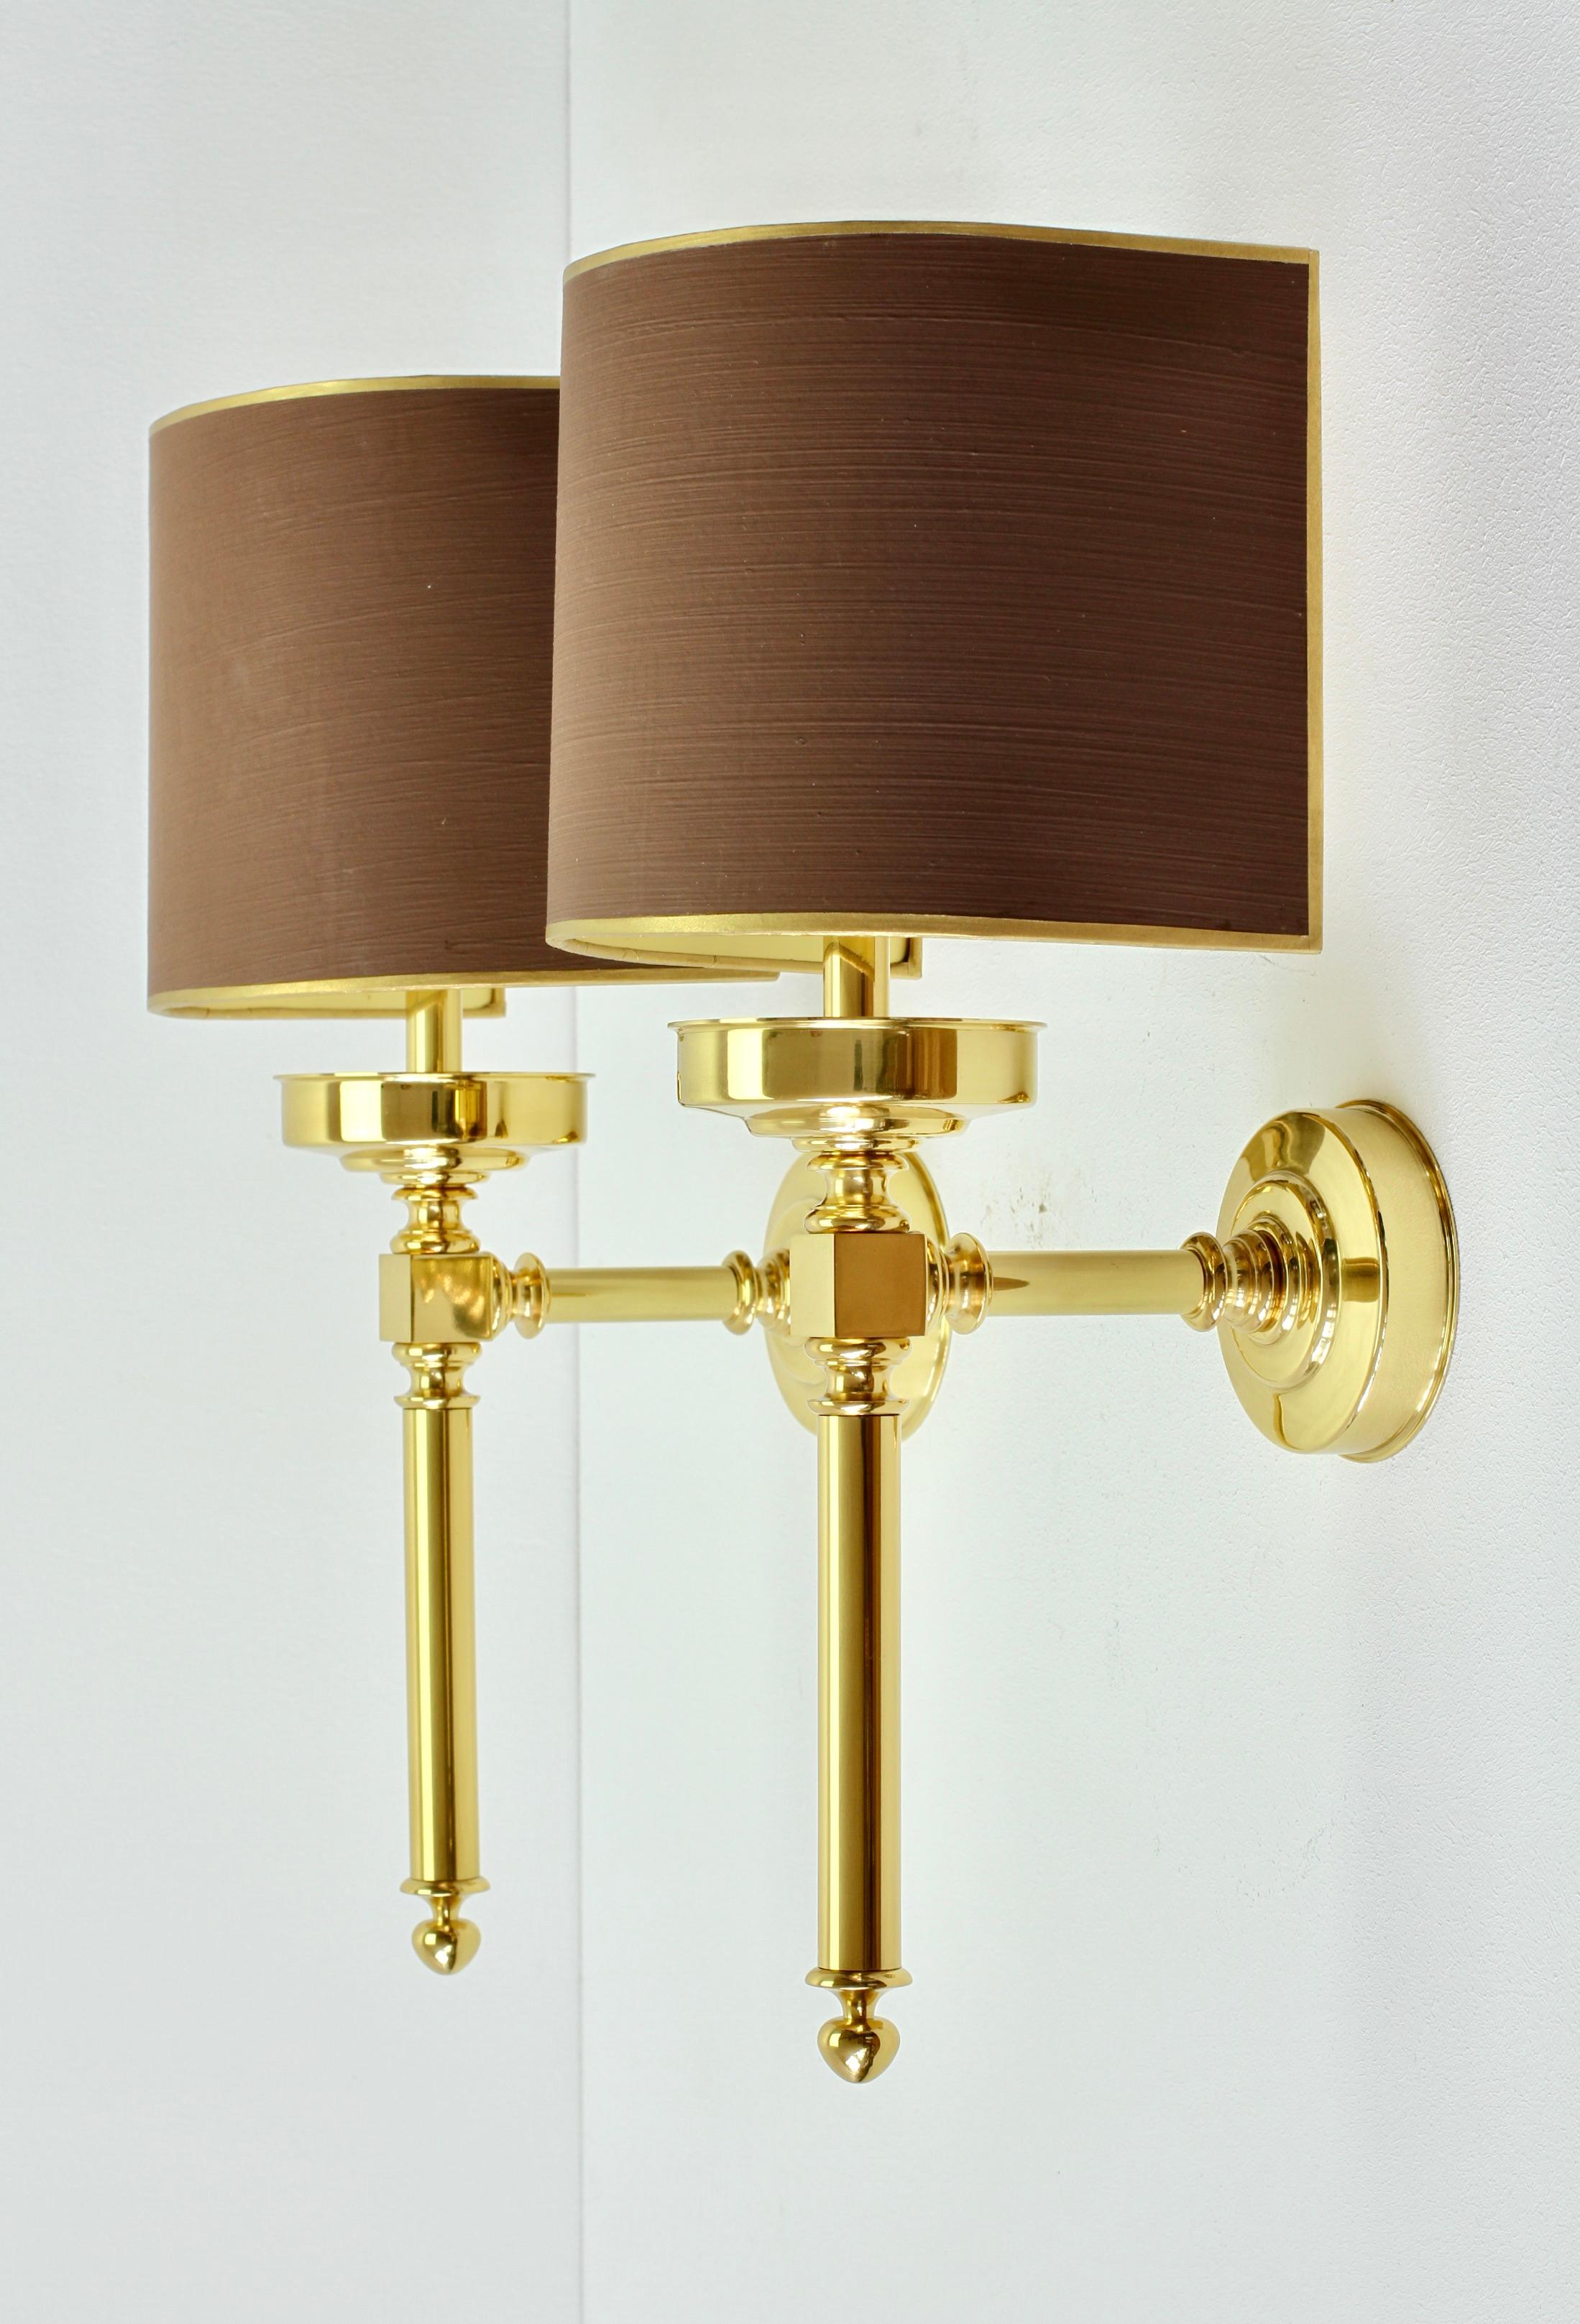 Stunning large pair of 'new old stock' vintage midcentury wall lights, lamps or sconces in polished brass with original maroon painted gold trim curved shades by the Vereinigten Werkstätten München (Munich), circa 1970s. Beautiful design and